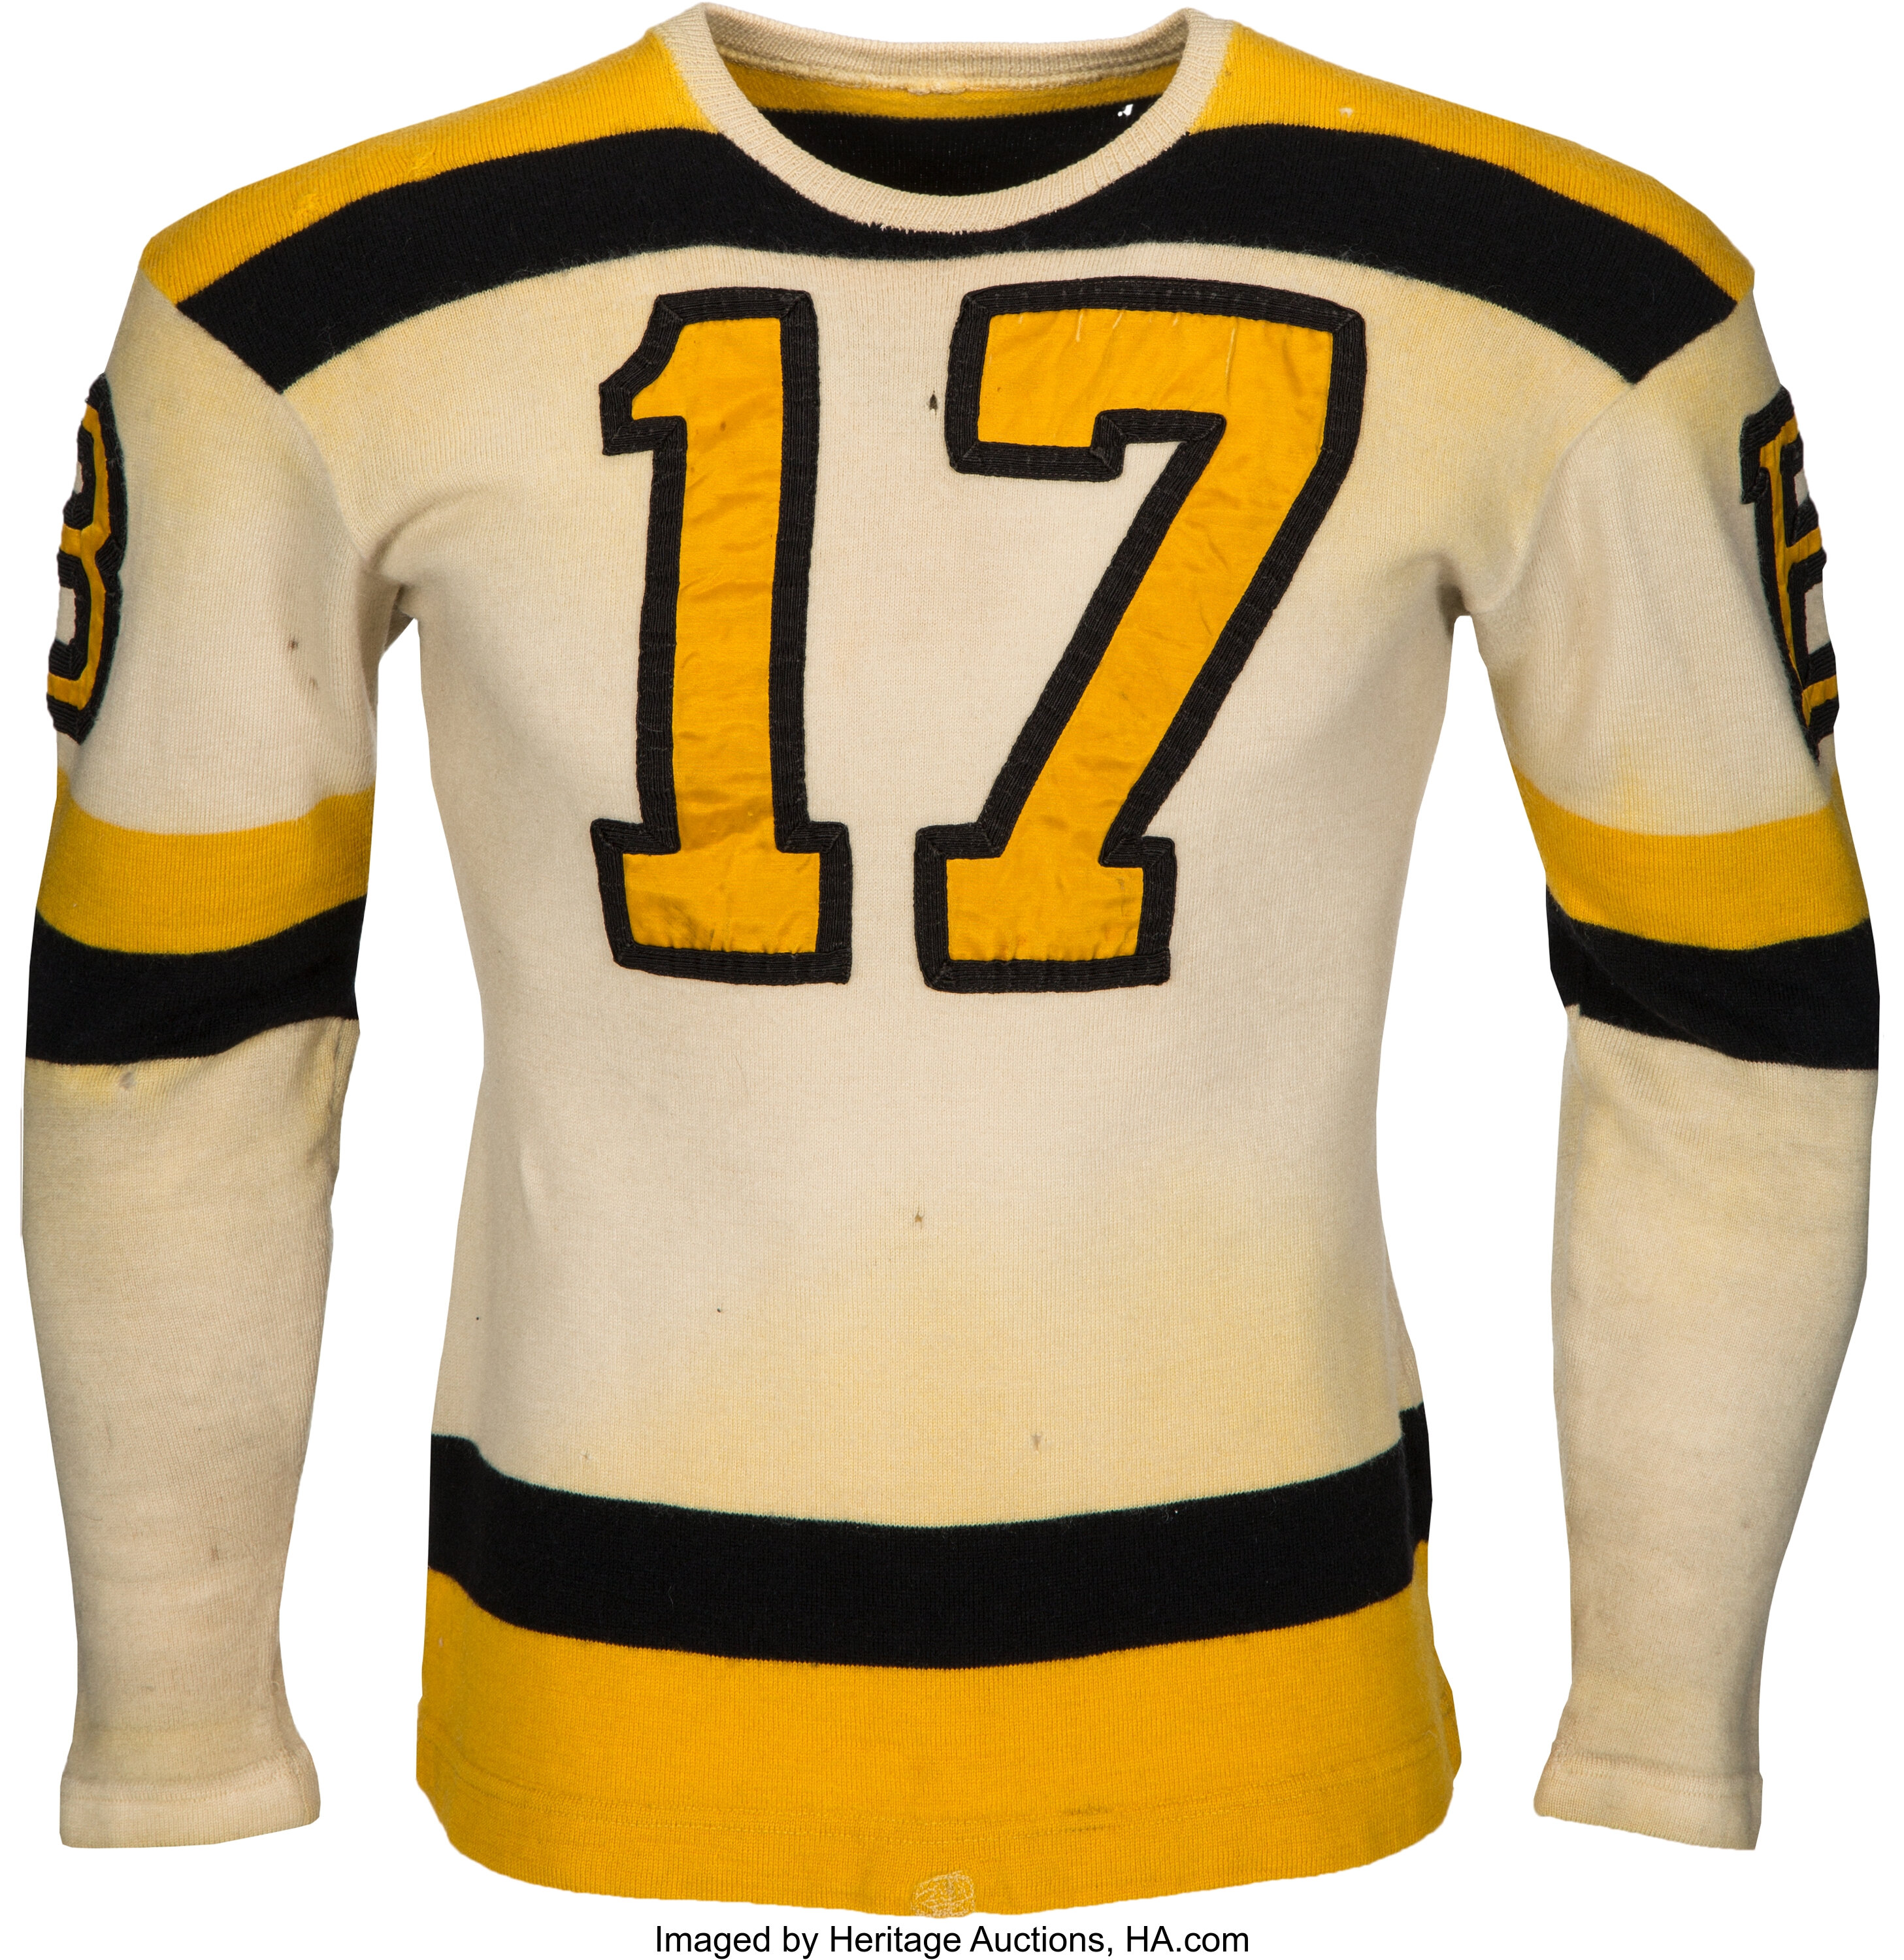 Boston Bruins 1940-41 jersey artwork, This is a highly deta…